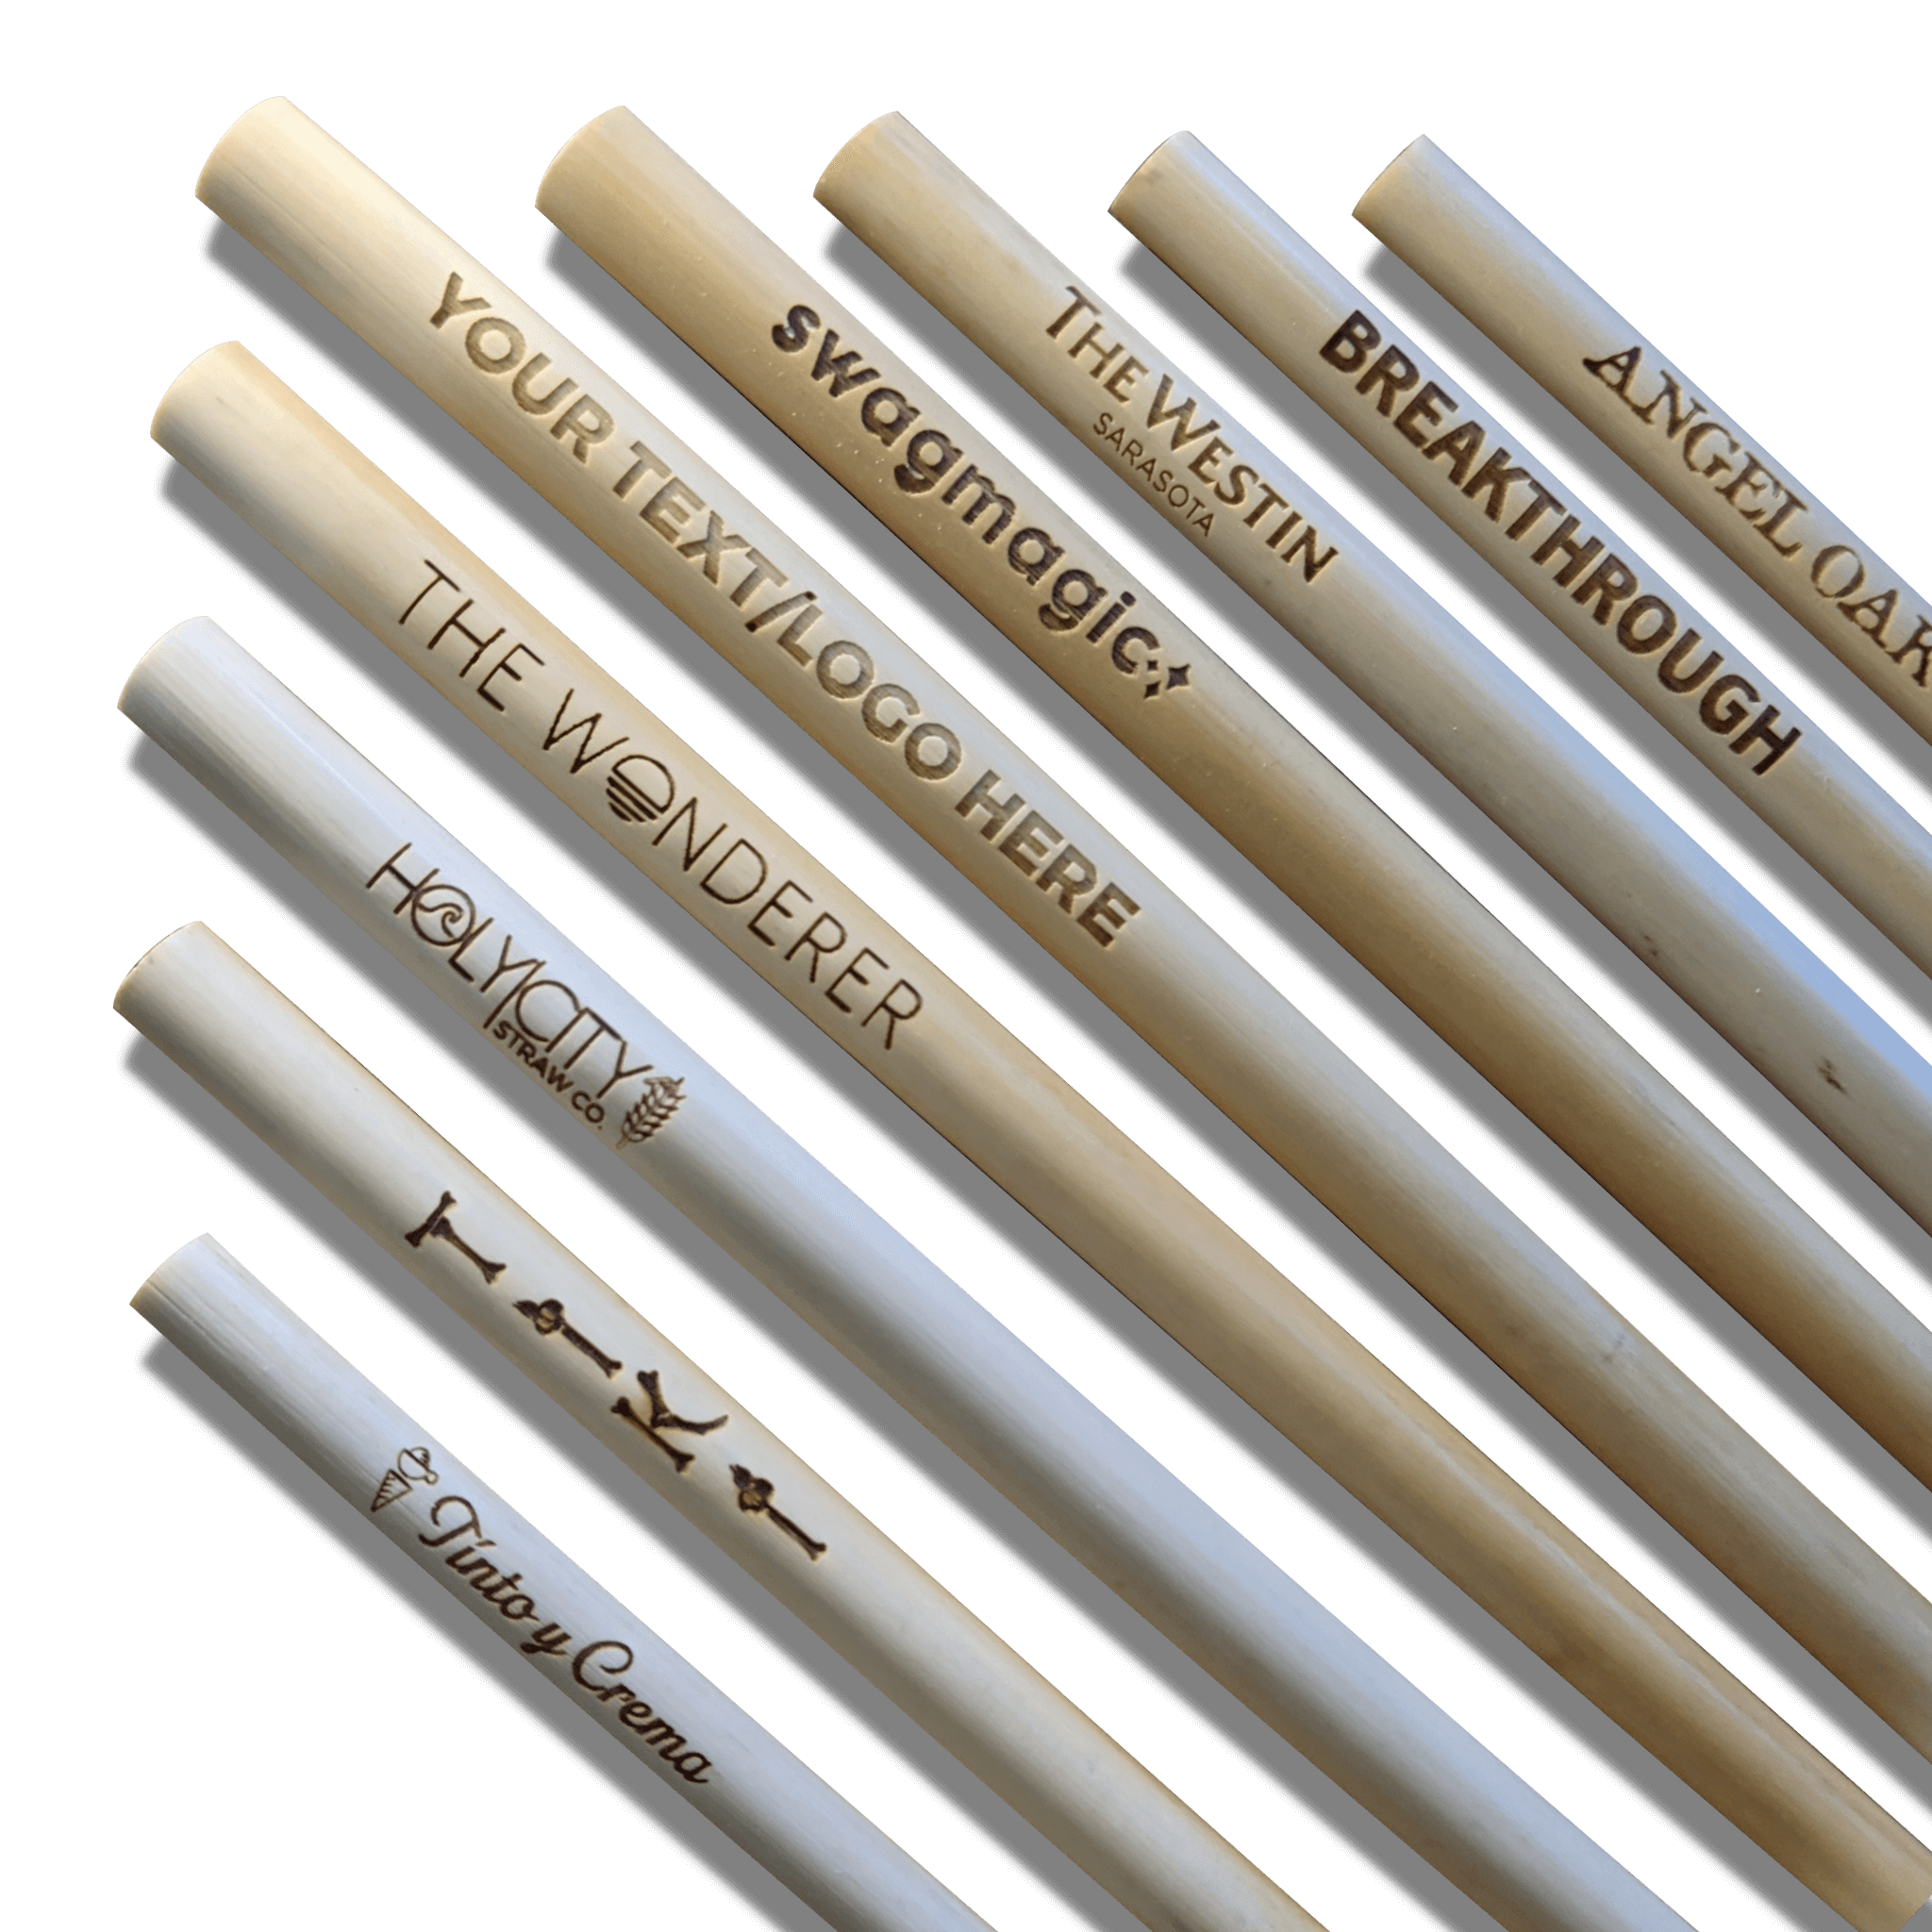 Laser Engraved Reusable Reed Straw – Holy City Straw Company